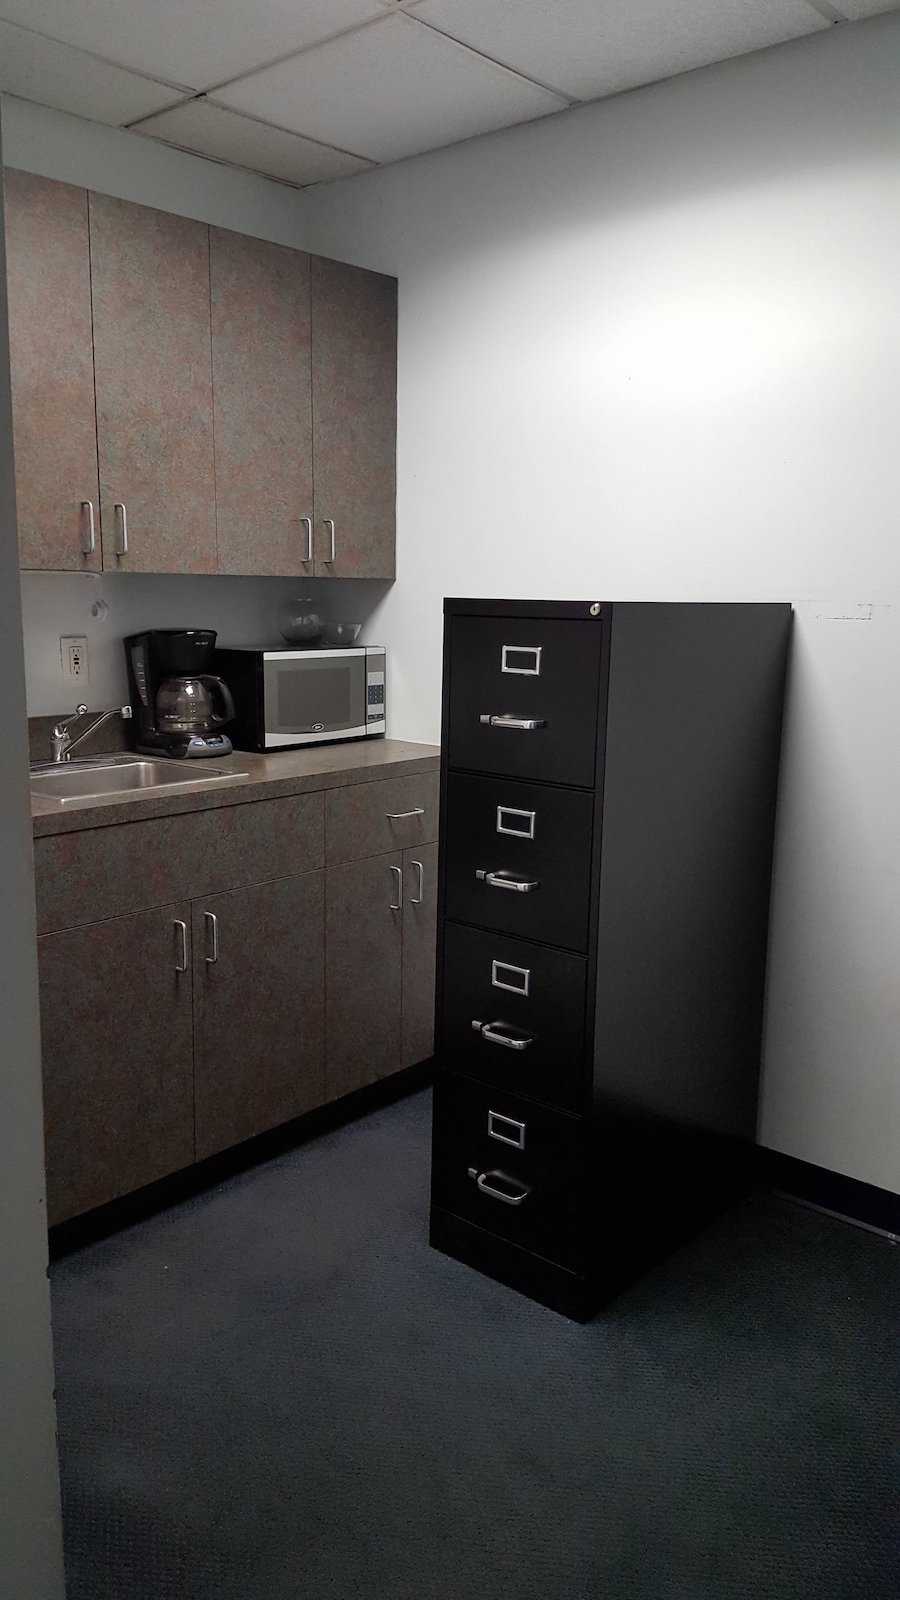 Near Park Avenue and 56th Street Office Space - Kitchenette